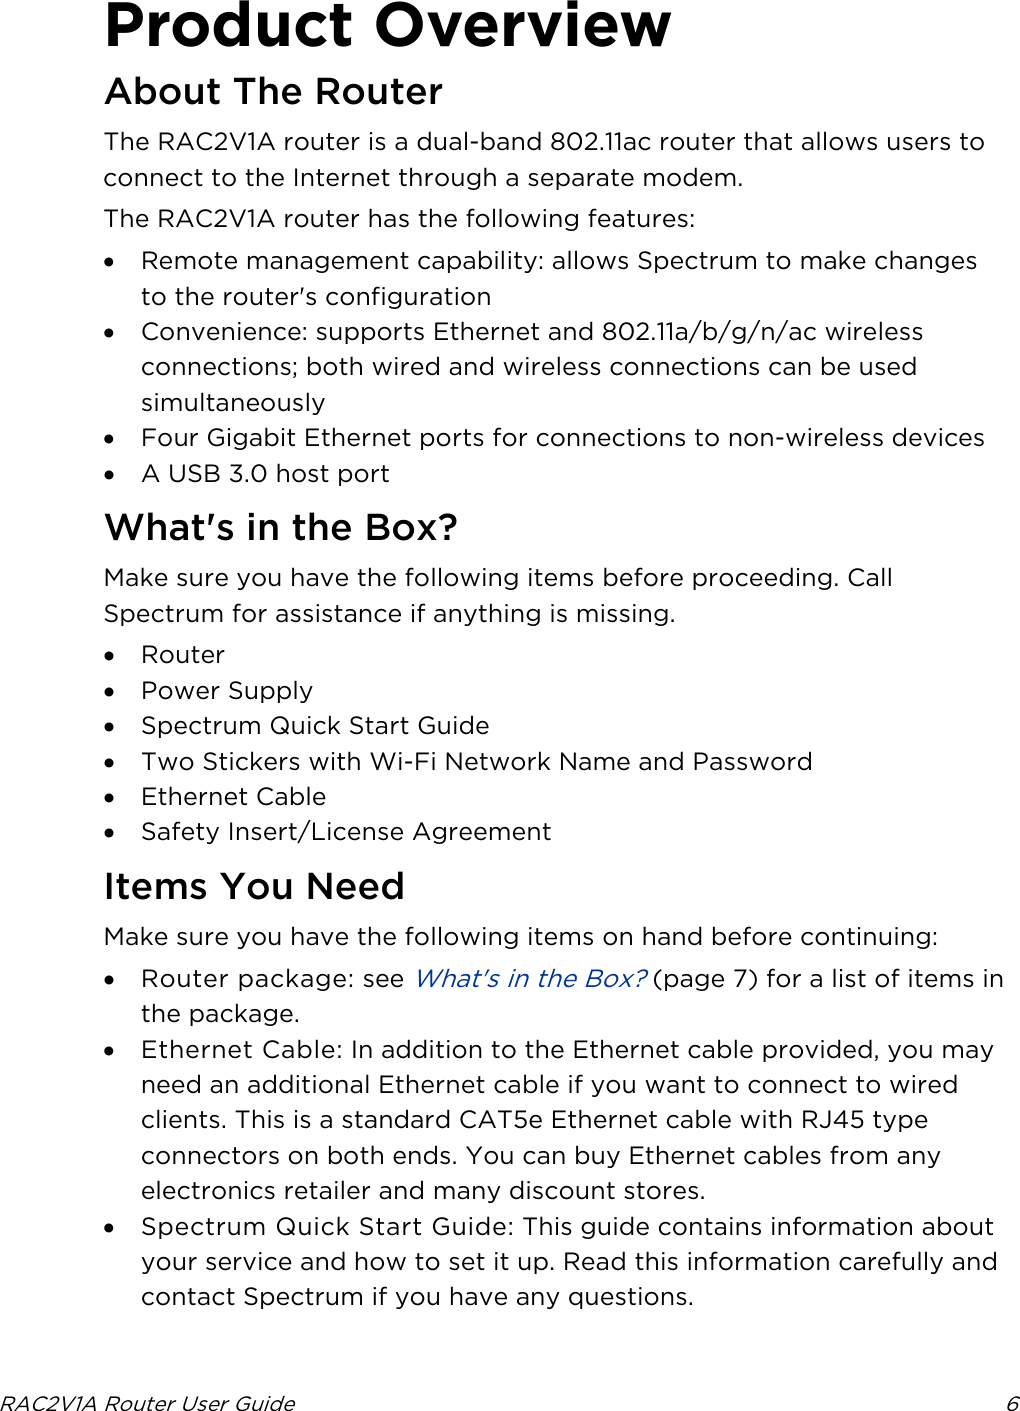  RAC2V1A Router User Guide  6  Product Overview About The Router The RAC2V1A router is a dual-band 802.11ac router that allows users to connect to the Internet through a separate modem. The RAC2V1A router has the following features: • Remote management capability: allows Spectrum to make changes to the router&apos;s configuration • Convenience: supports Ethernet and 802.11a/b/g/n/ac wireless connections; both wired and wireless connections can be used simultaneously • Four Gigabit Ethernet ports for connections to non-wireless devices • A USB 3.0 host port   What&apos;s in the Box? Make sure you have the following items before proceeding. Call Spectrum for assistance if anything is missing. • Router • Power Supply • Spectrum Quick Start Guide • Two Stickers with Wi-Fi Network Name and Password • Ethernet Cable • Safety Insert/License Agreement   Items You Need Make sure you have the following items on hand before continuing: • Router package: see What&apos;s in the Box? (page 7) for a list of items in the package. • Ethernet Cable: In addition to the Ethernet cable provided, you may need an additional Ethernet cable if you want to connect to wired clients. This is a standard CAT5e Ethernet cable with RJ45 type connectors on both ends. You can buy Ethernet cables from any electronics retailer and many discount stores.  • Spectrum Quick Start Guide: This guide contains information about your service and how to set it up. Read this information carefully and contact Spectrum if you have any questions.   